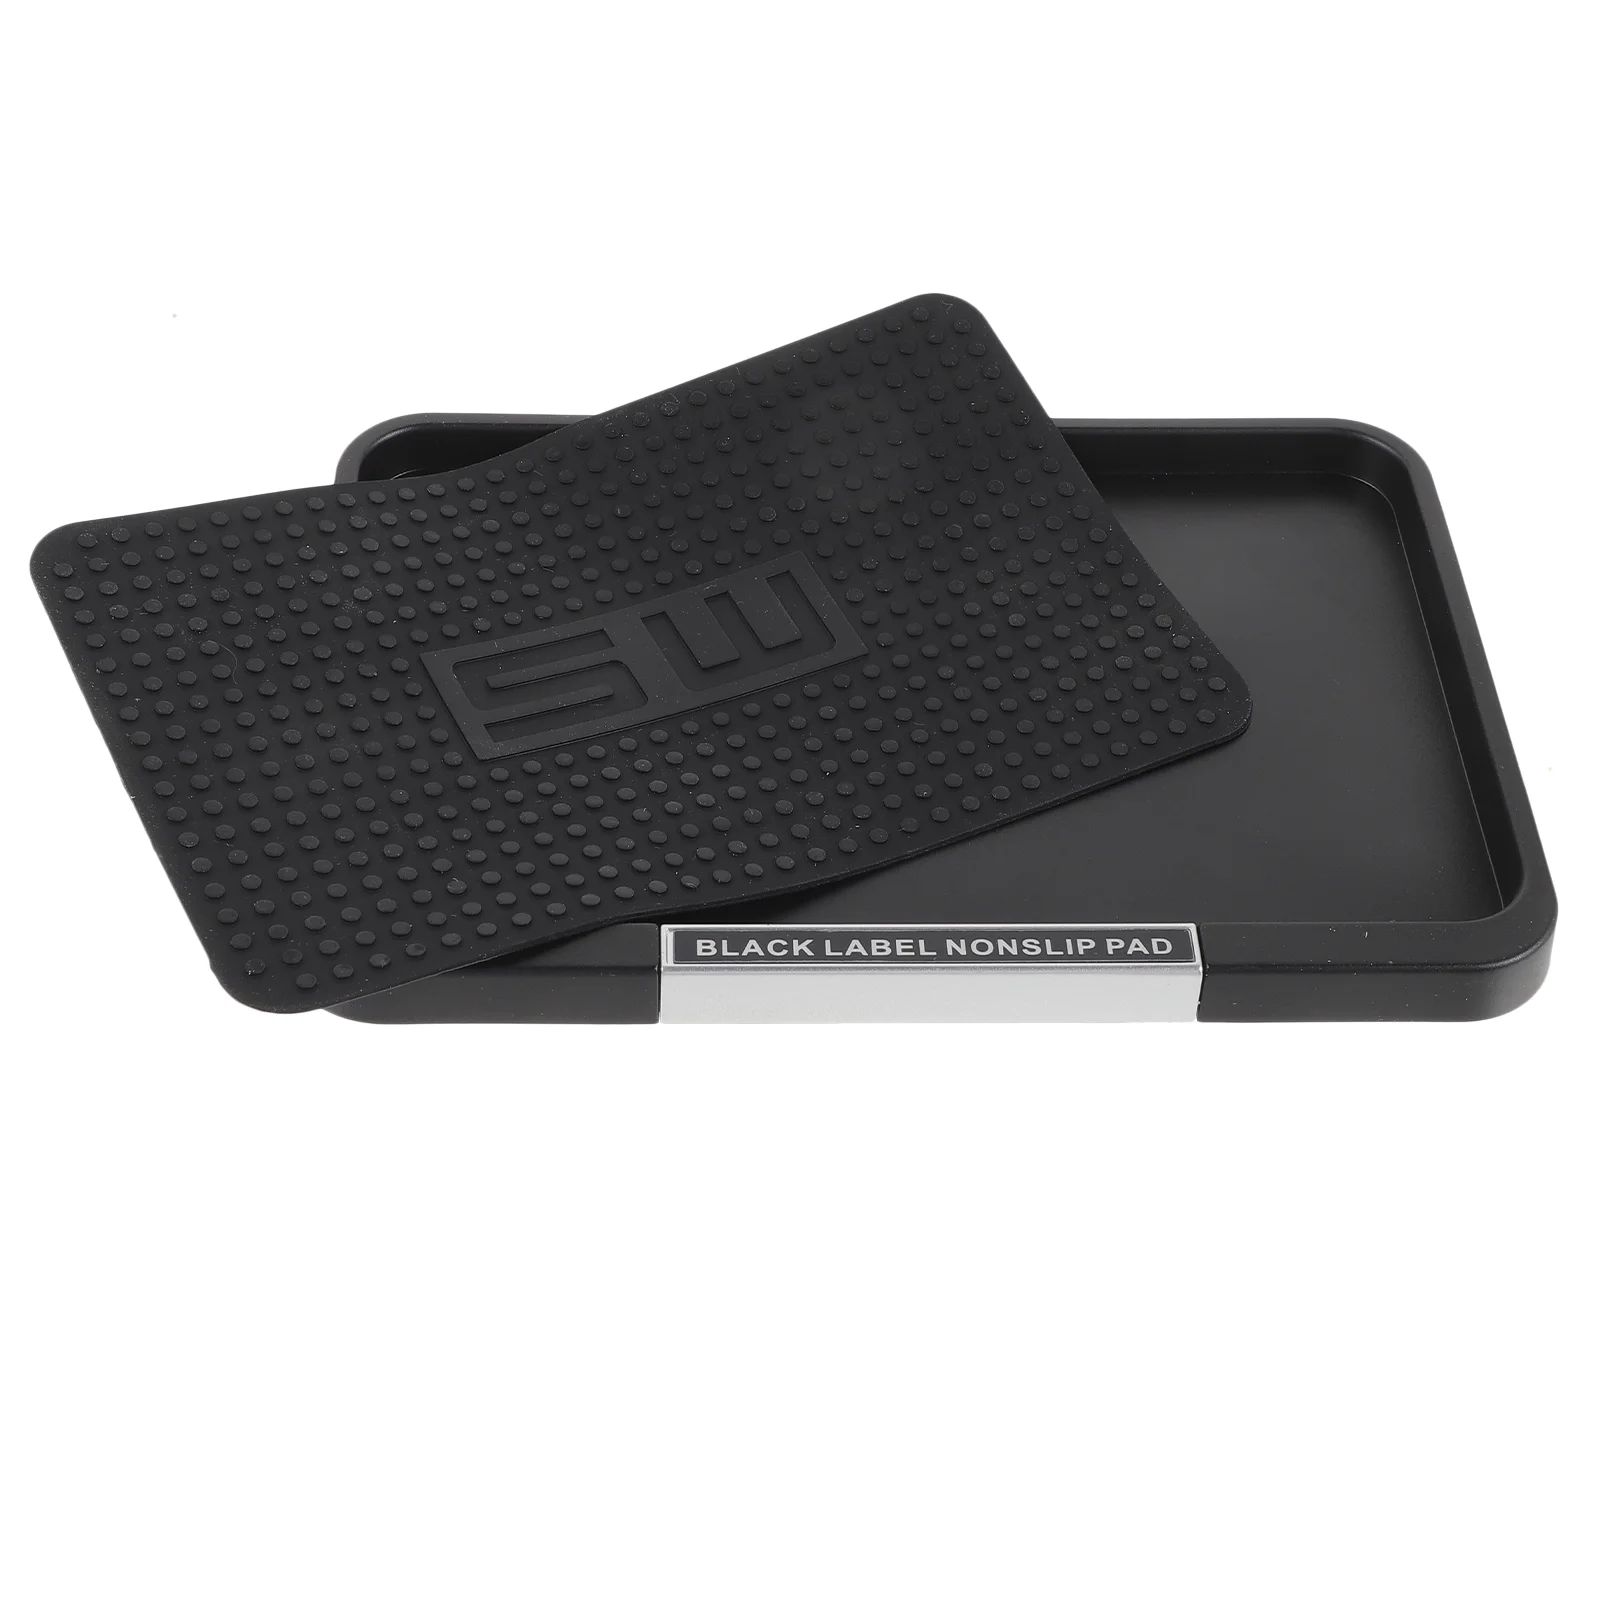 

Car Dashboard Mat Anti Skid Dash Mount Pad Anti Dashboard Tray Auto Dash Mat for Cell Electronic Devices Keys 17x11cm